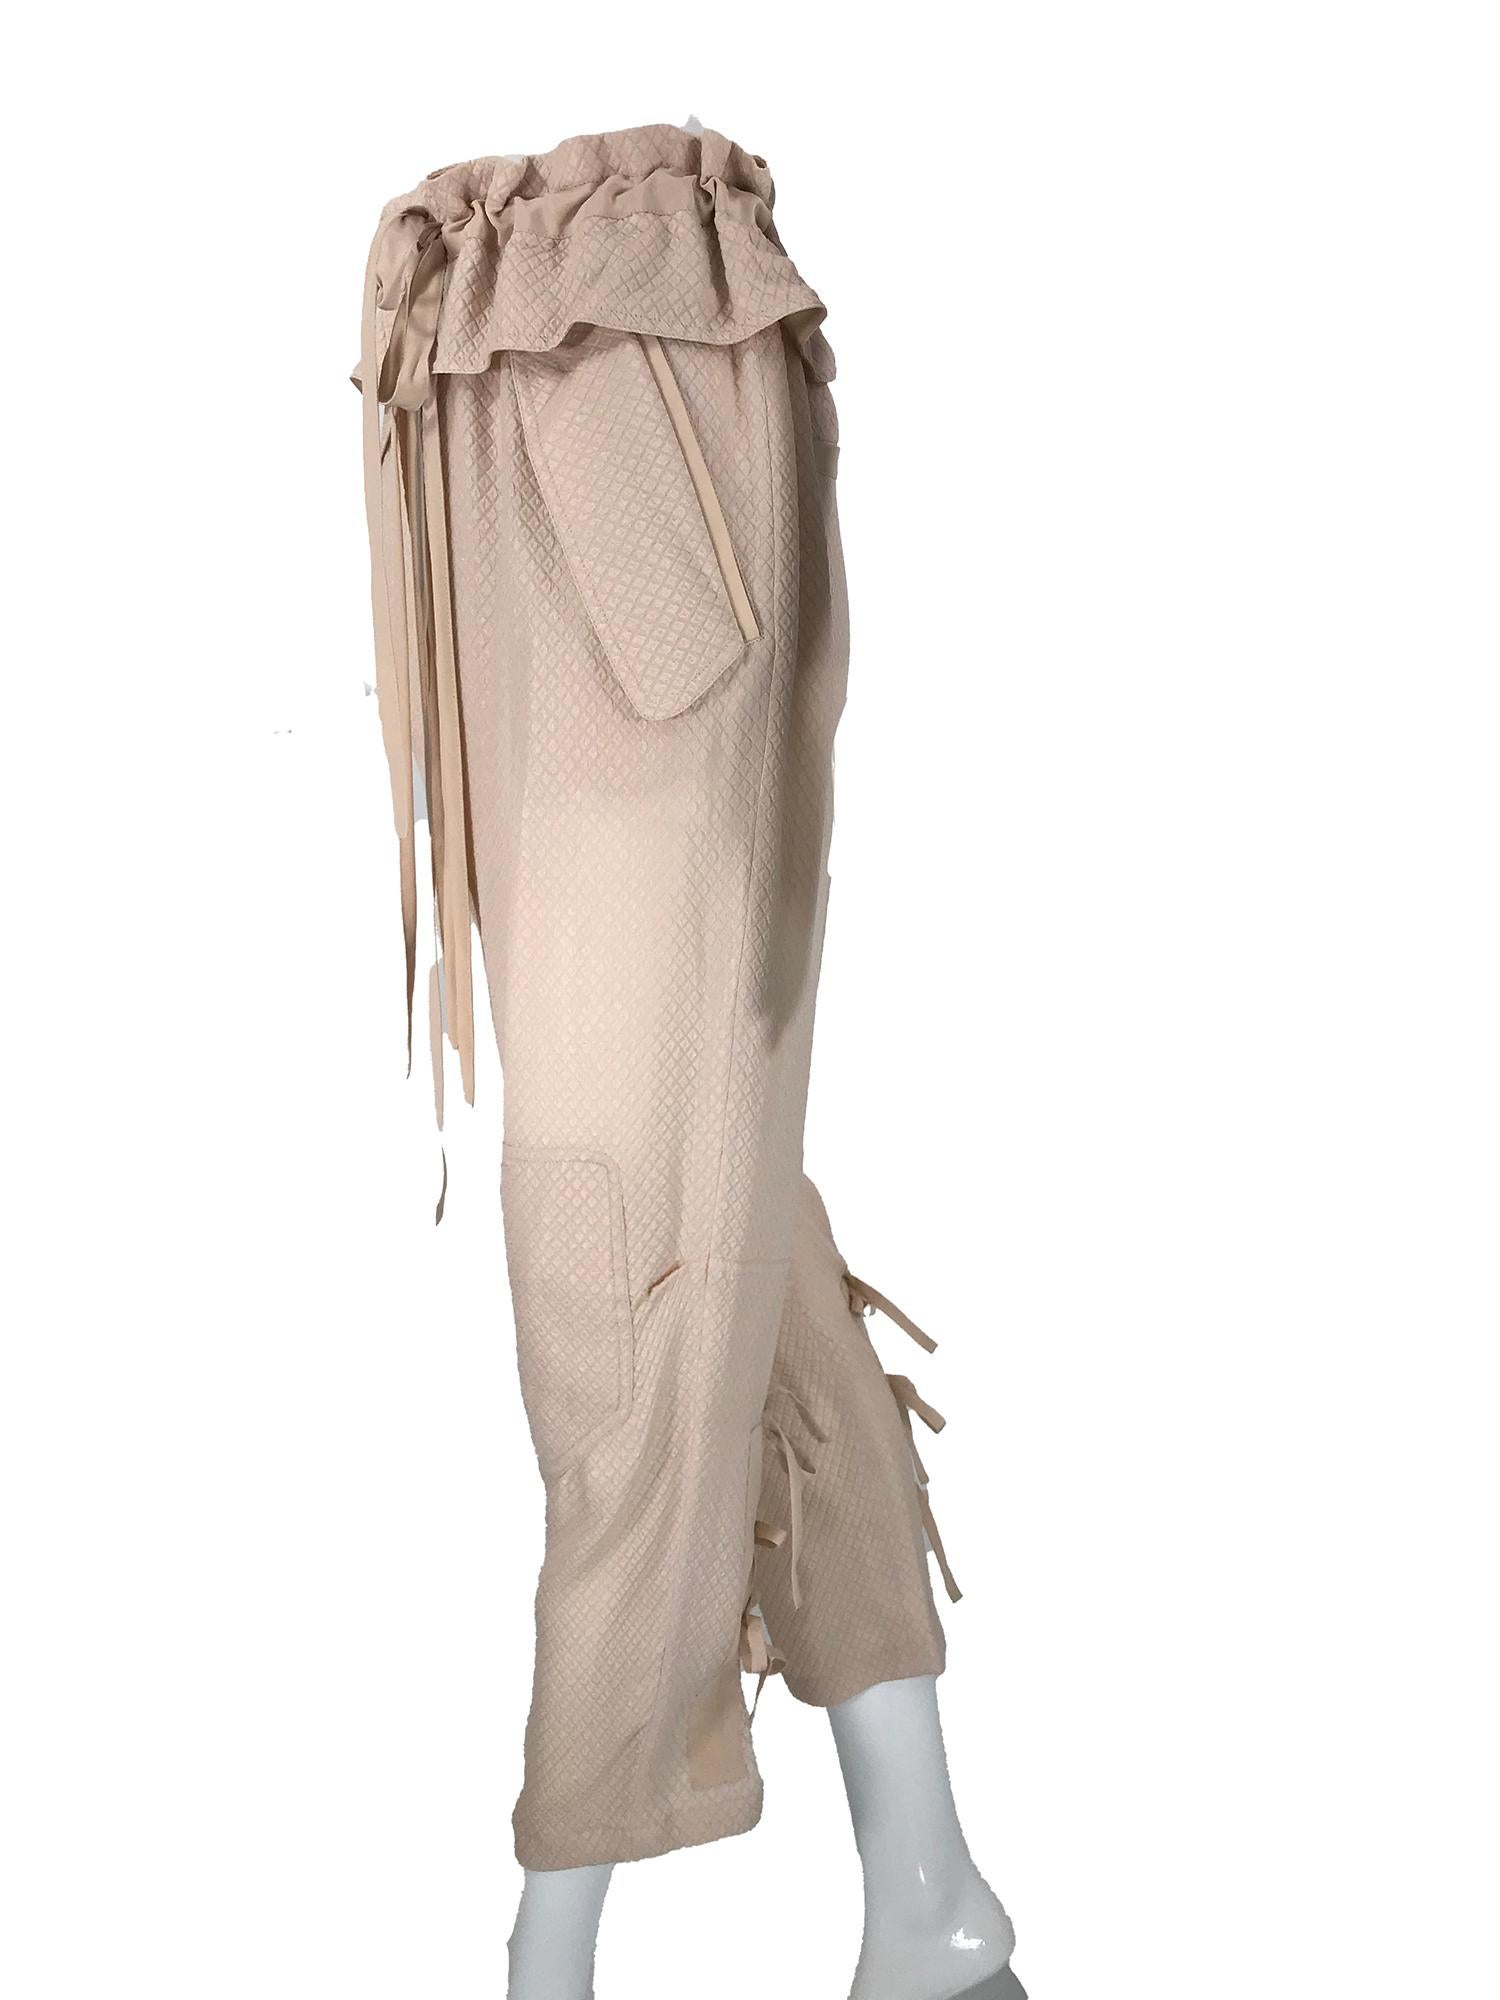 Chloe taupe diamond weave silk paper bag waist, gathered tie leg trouser.
Peachy/taupe textured diamond weave silk these trousers bridge the gap between dress and casual. Paper bag waist ties with silk crepe ties, there is a ruffle at the waist and